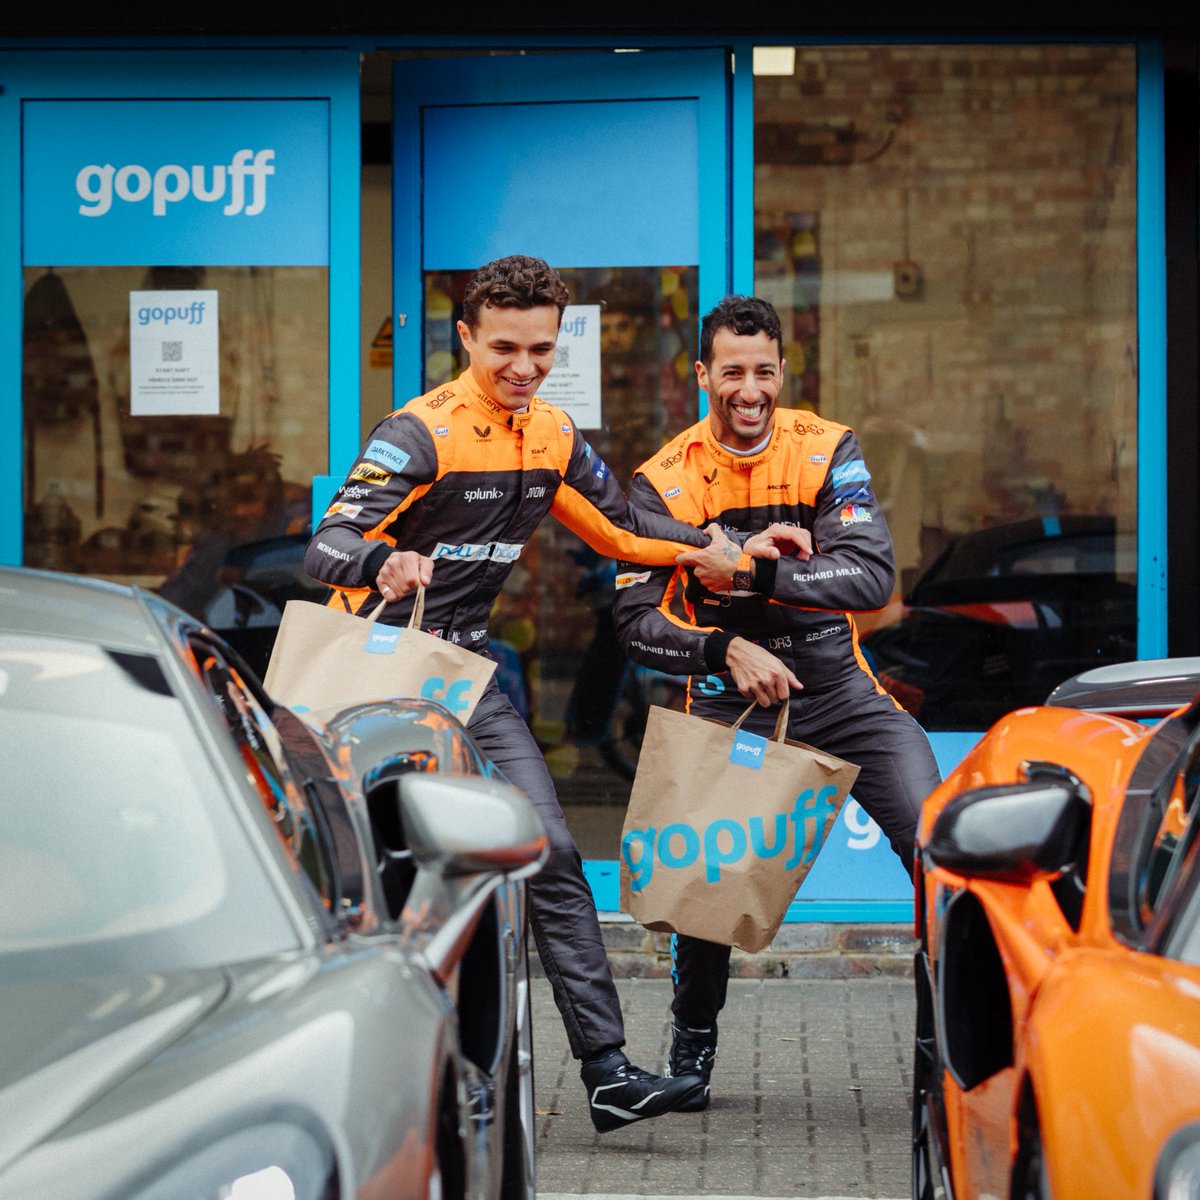 We are proud to be official partners of the @McLarenF1 team. We are fast, they are even faster. It just works. Who’s excited for this weekend? Can't wait to see @LandoNorris & @DanielRicciardo in action! #Gopuff #McLaren #BritishGP